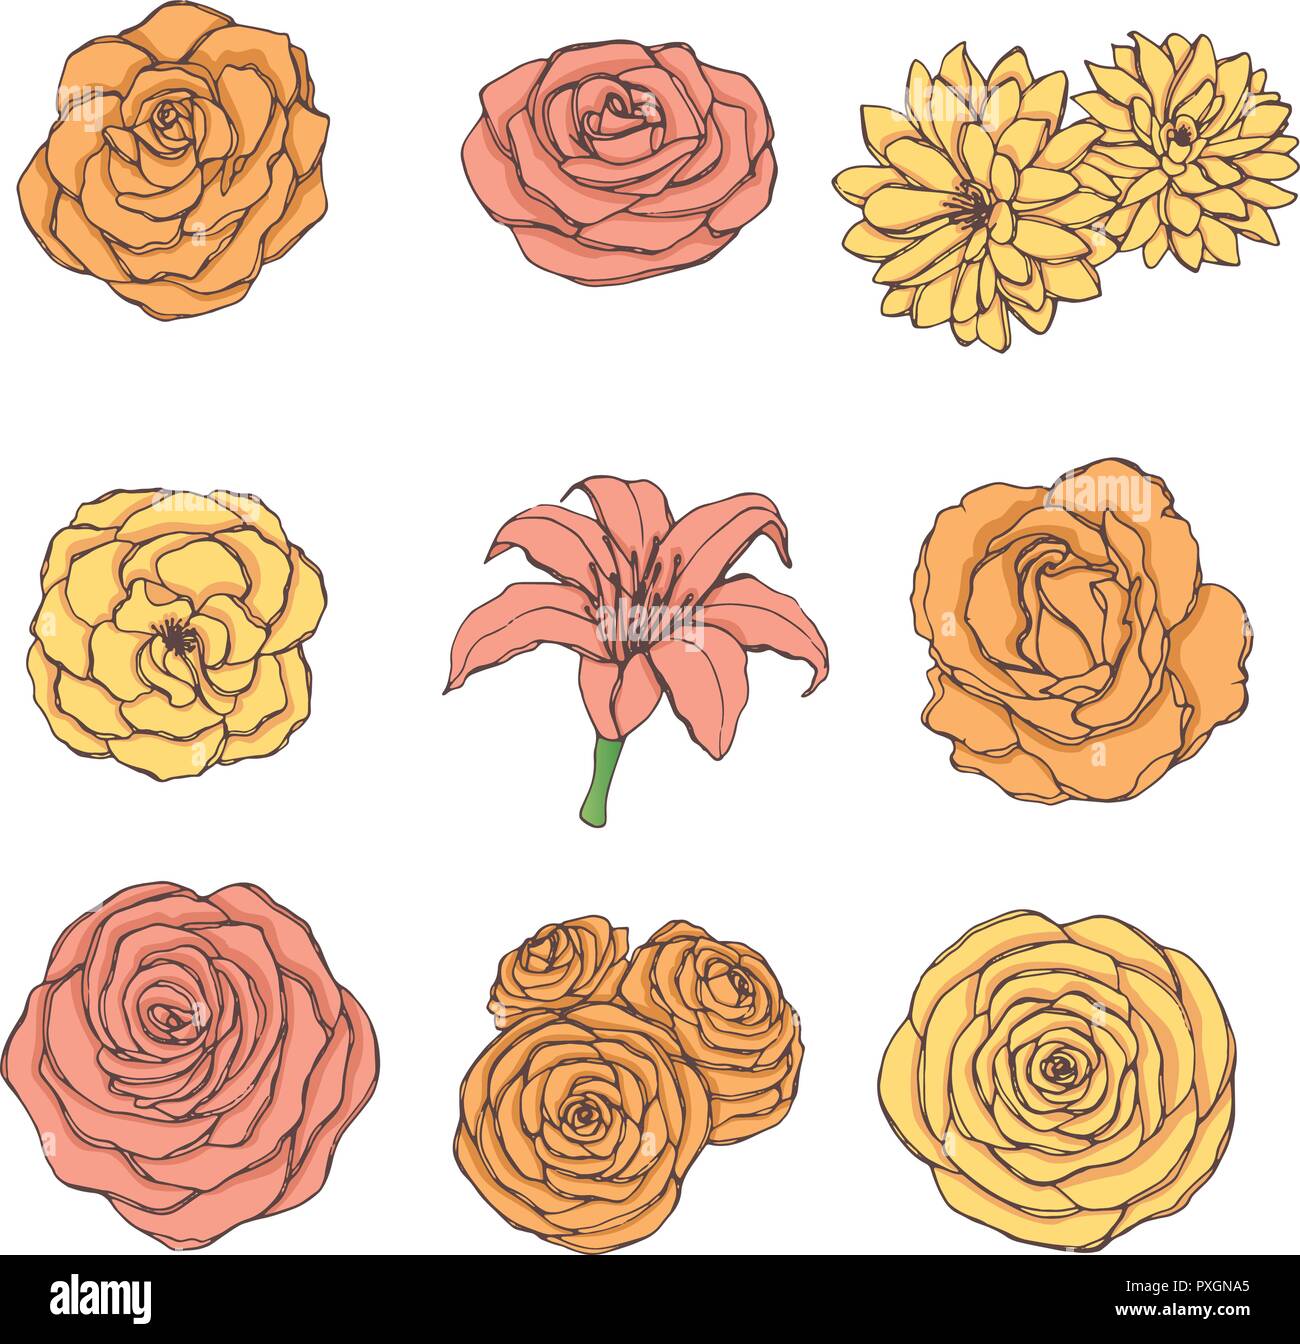 Hand drawn vector set of rose, lily, peony and chrysanthemum flowers in yellow, orange and pink colors isolated on the white background. Vintage flora Stock Vector